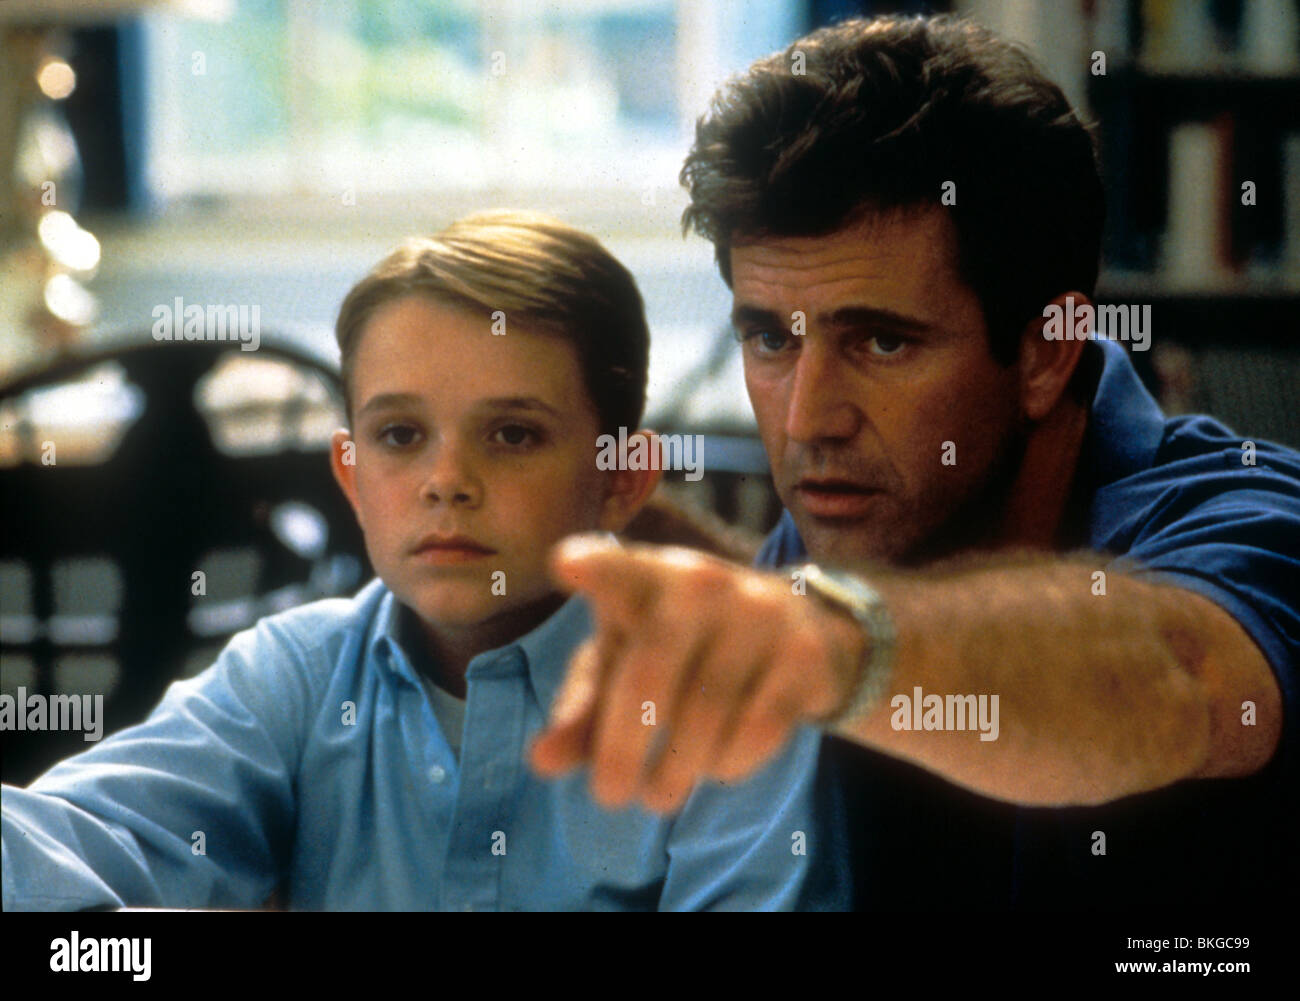 MEL GIBSON O/S 'THE MAN WITHOUT A FACE' (1993) WITH NICK STAHL MLG 041 Stock Photo